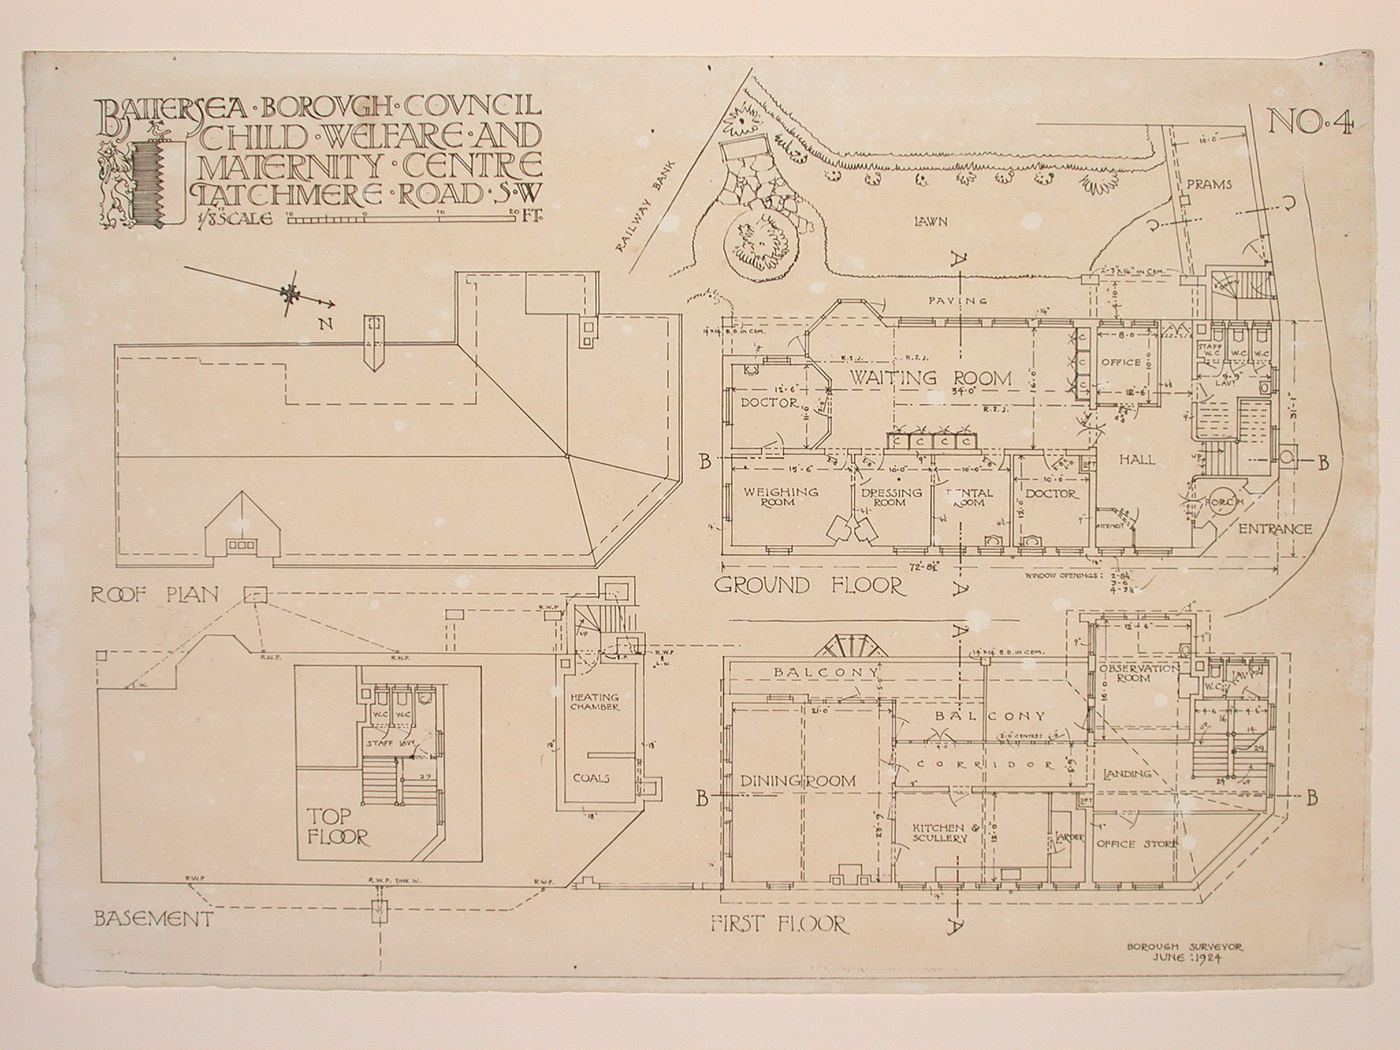 Floor plans showing the Battersea Borough child welfare and maternity centre